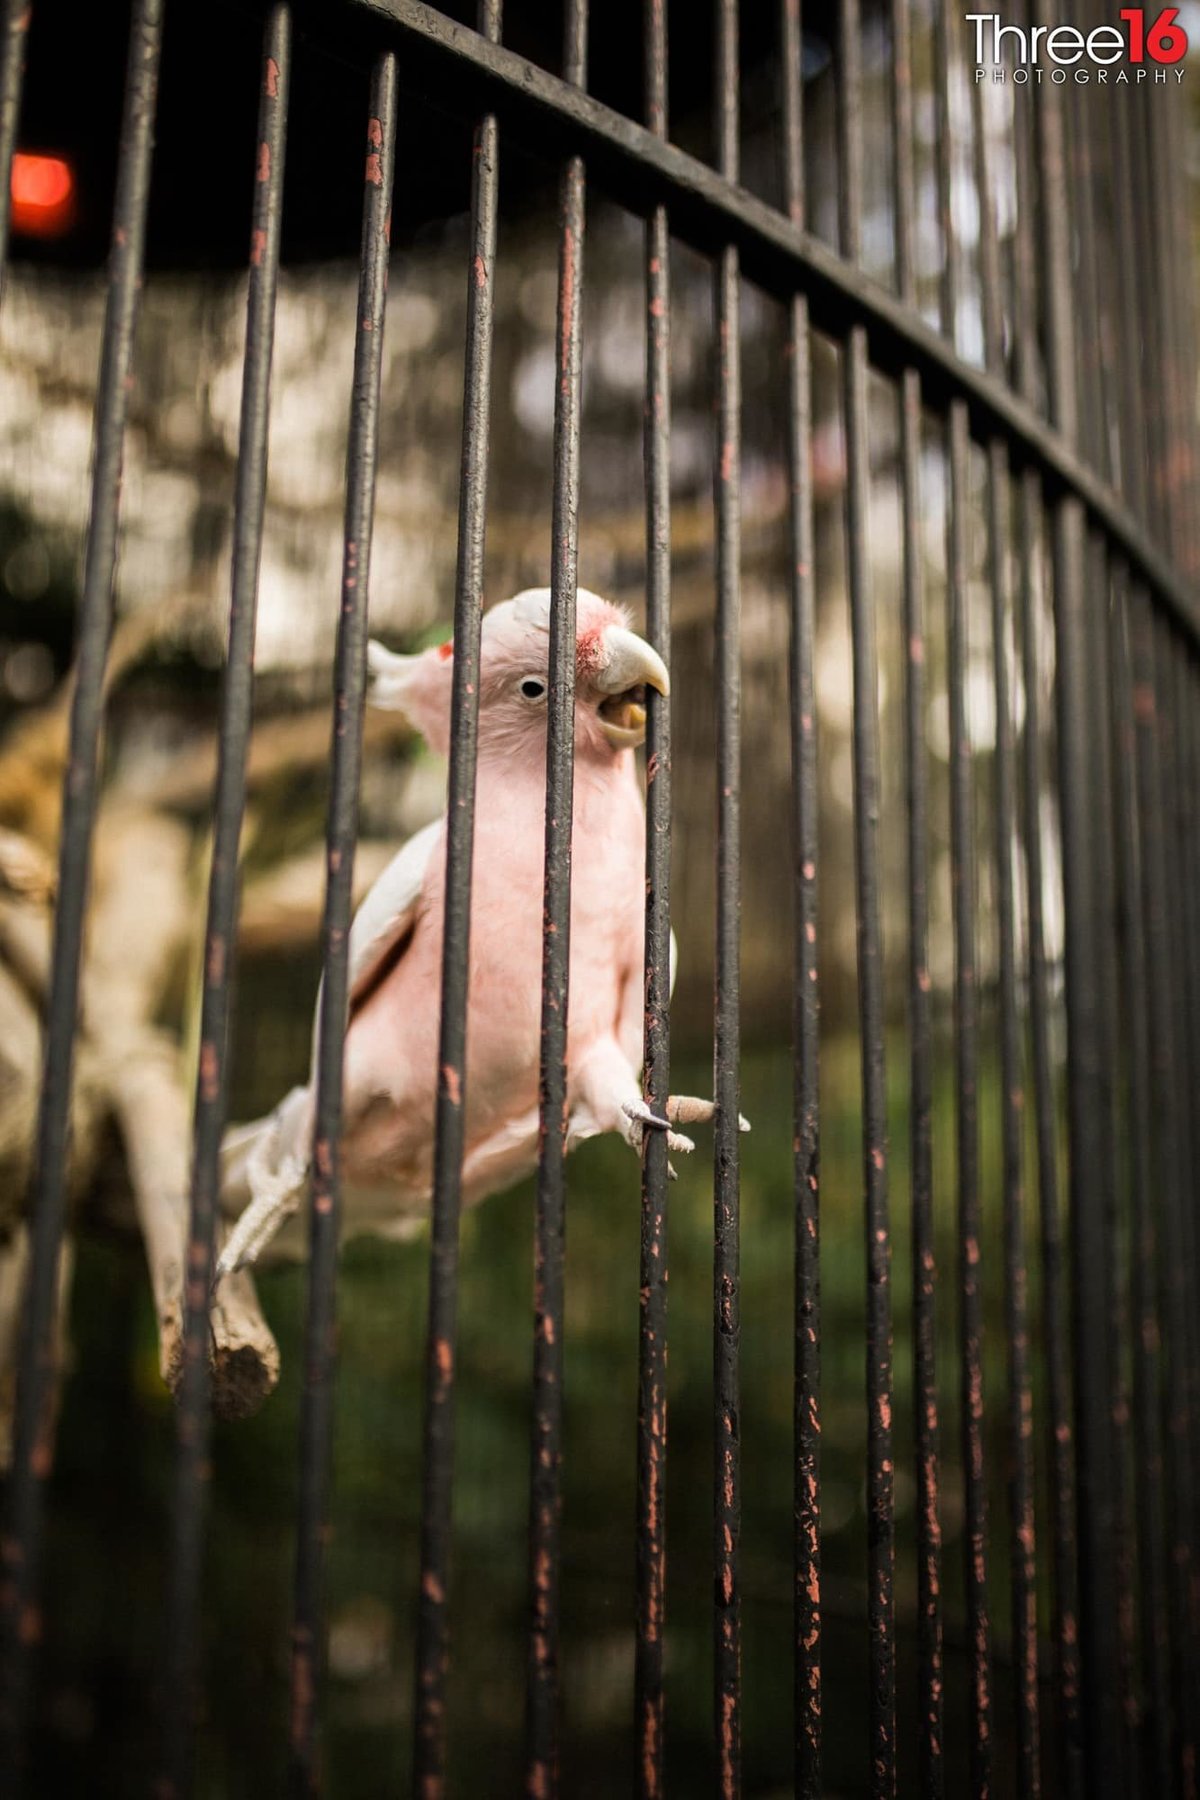 The pink macaw that is part of Ranch Las Lomas Zoo watches from his cage